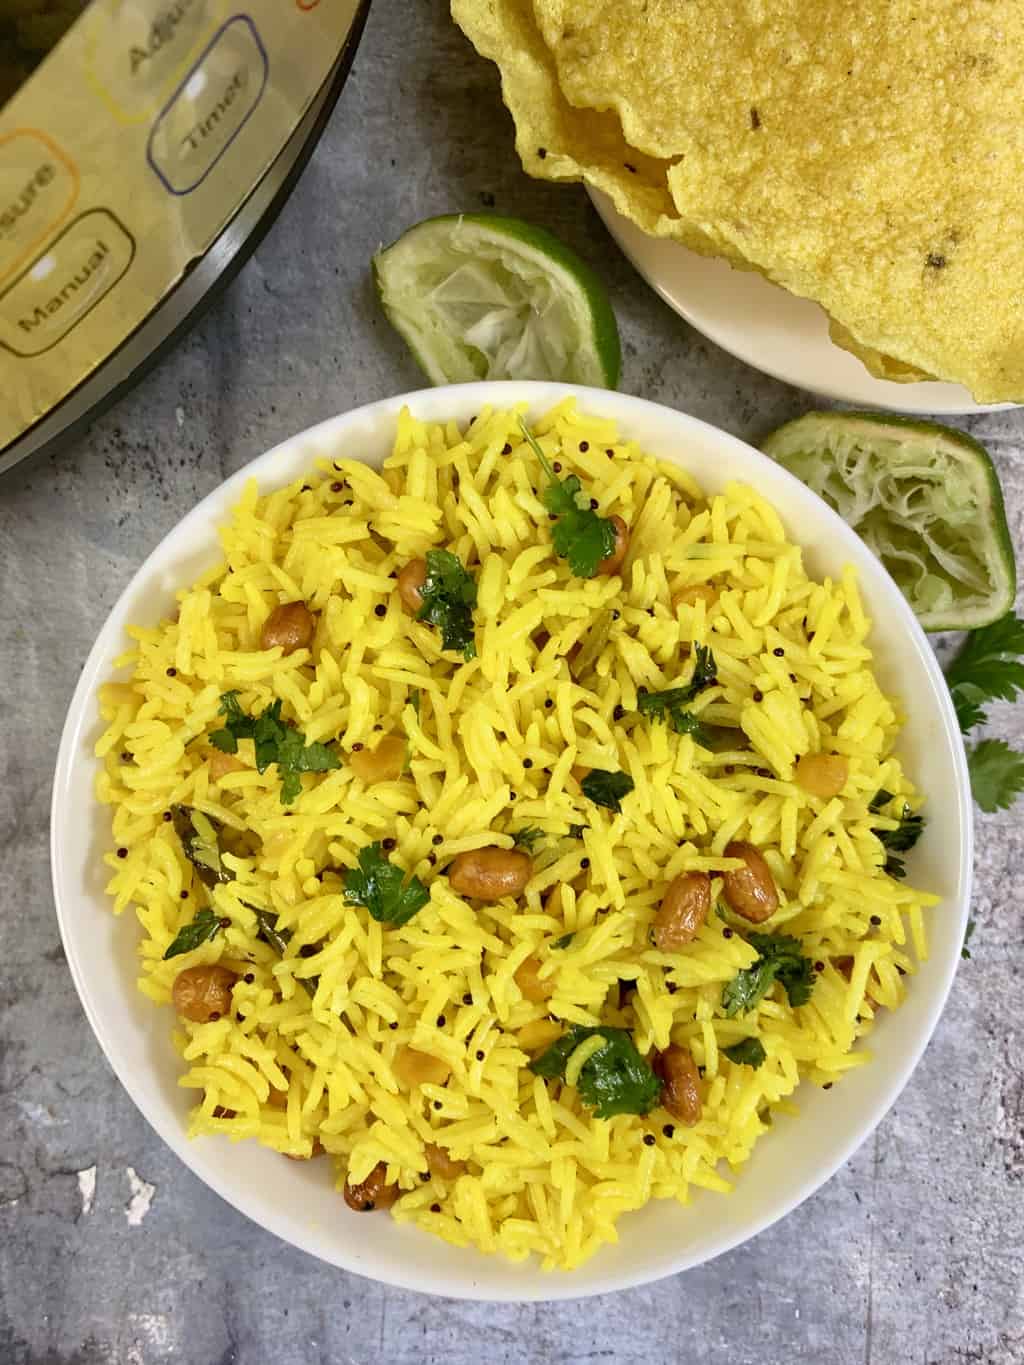 Lemon rice is a simple tangy flavored South Indian rice dish which is prepared with lemon juice, peanuts, and spices